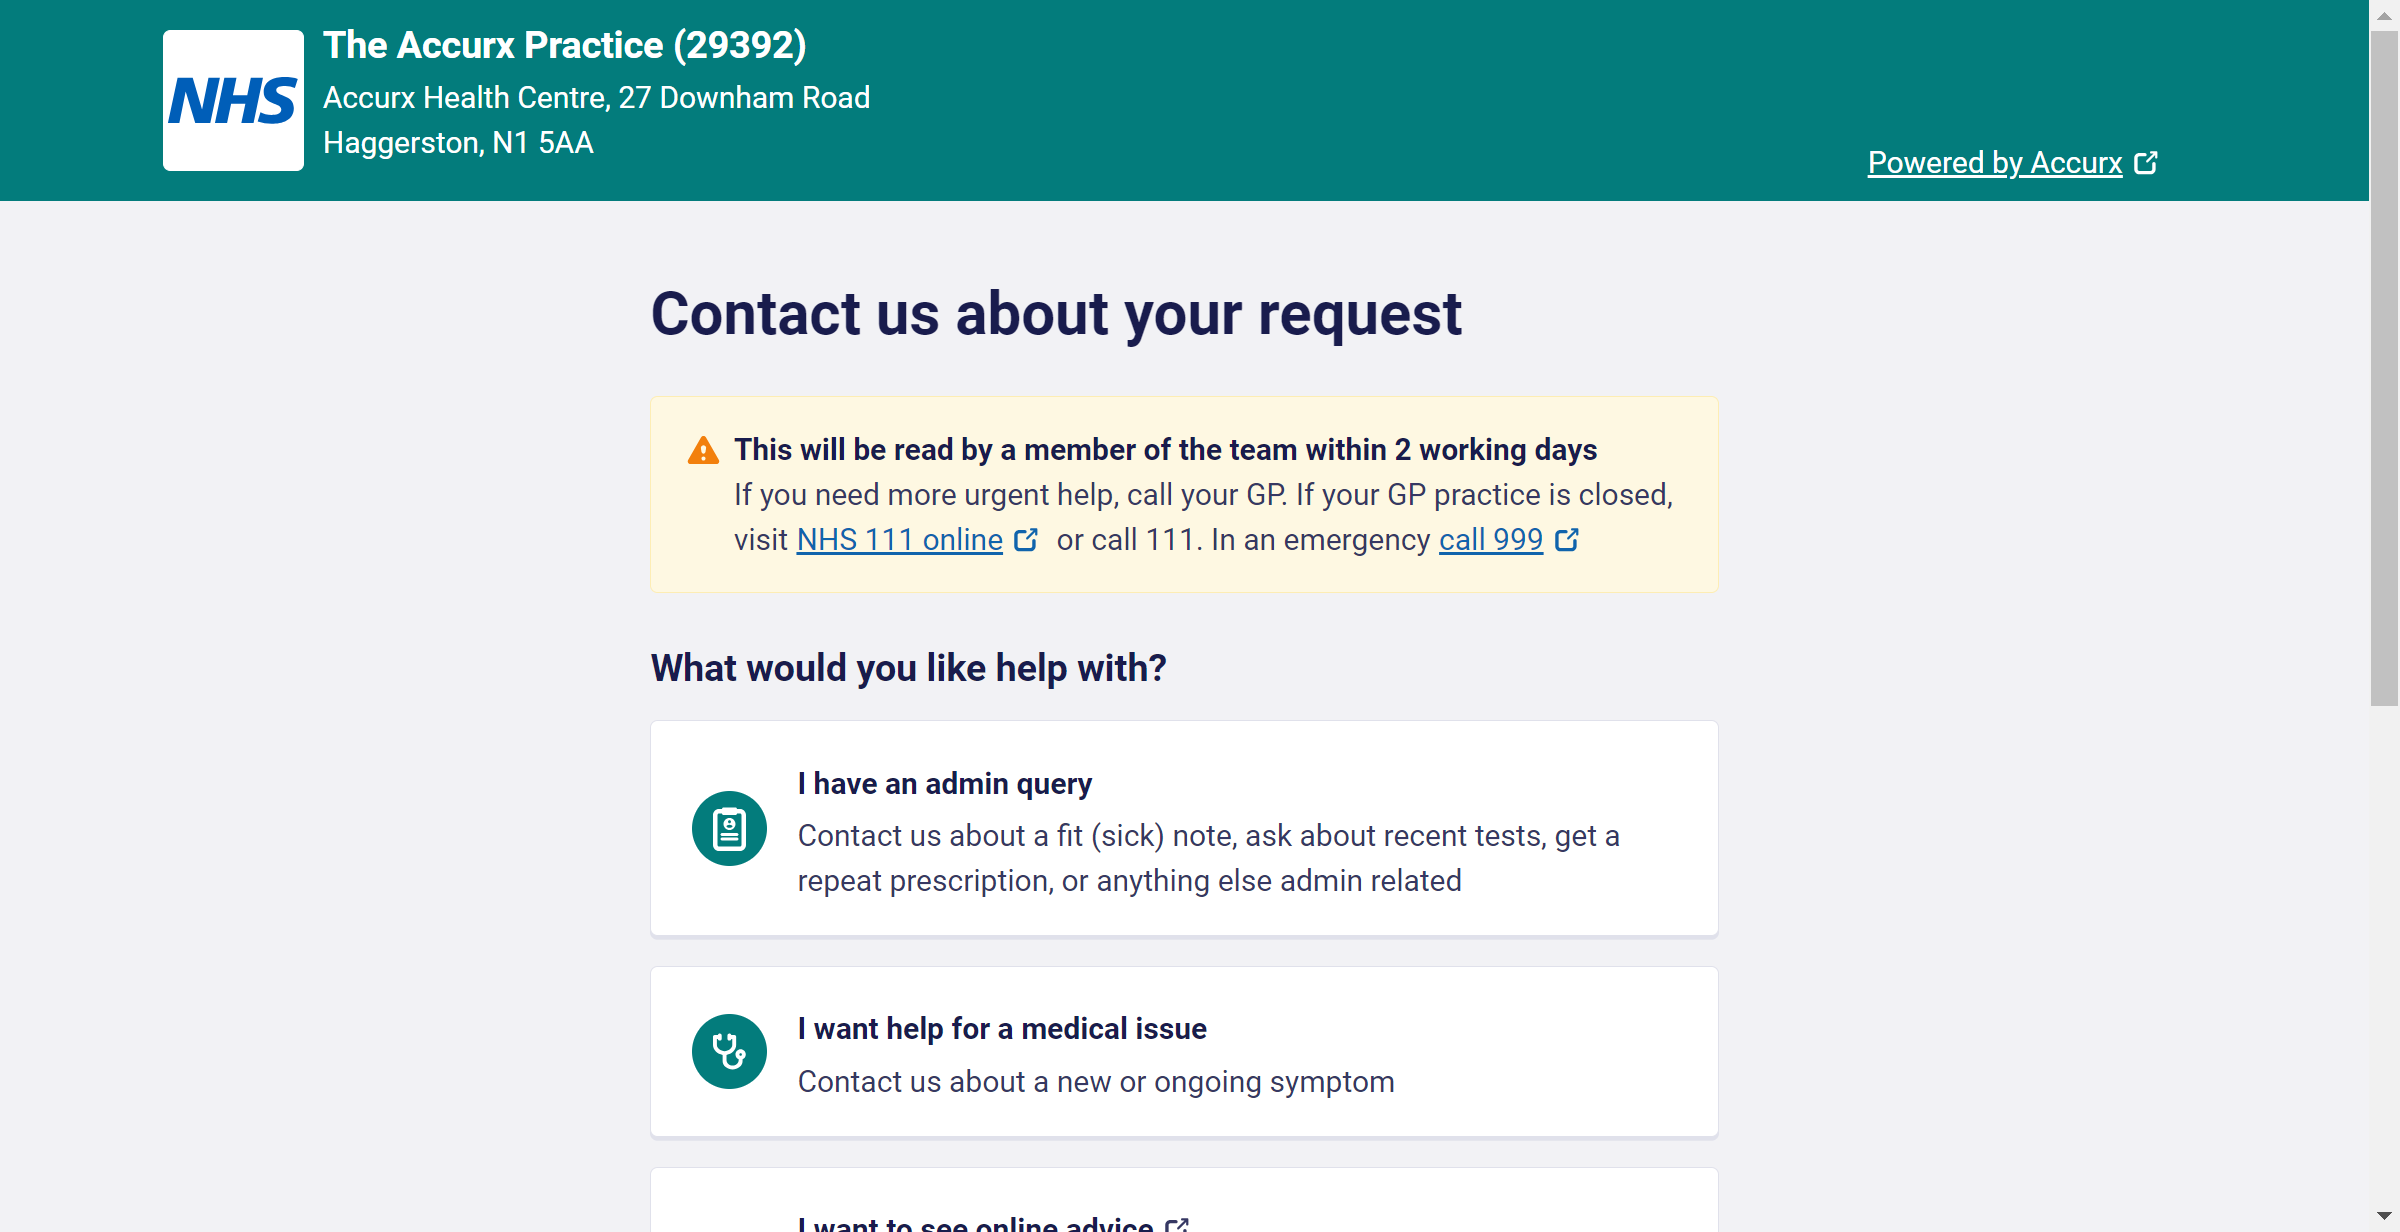 The practice can customise messages to patients, including setting expectations